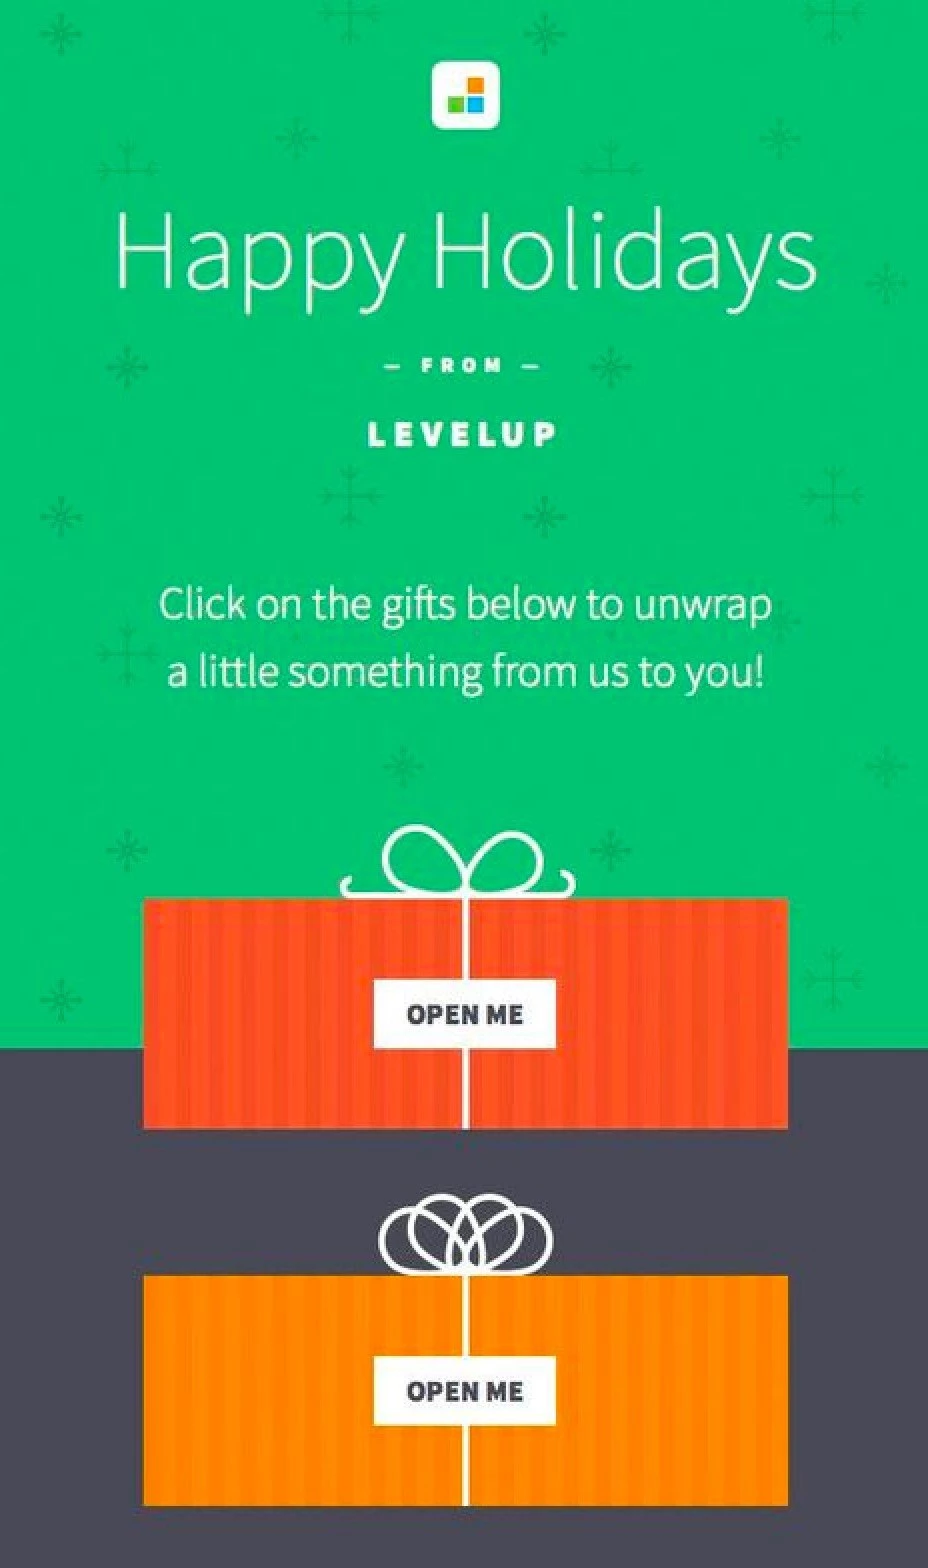 Levelup Christmas newsletter example orange present wraps green background